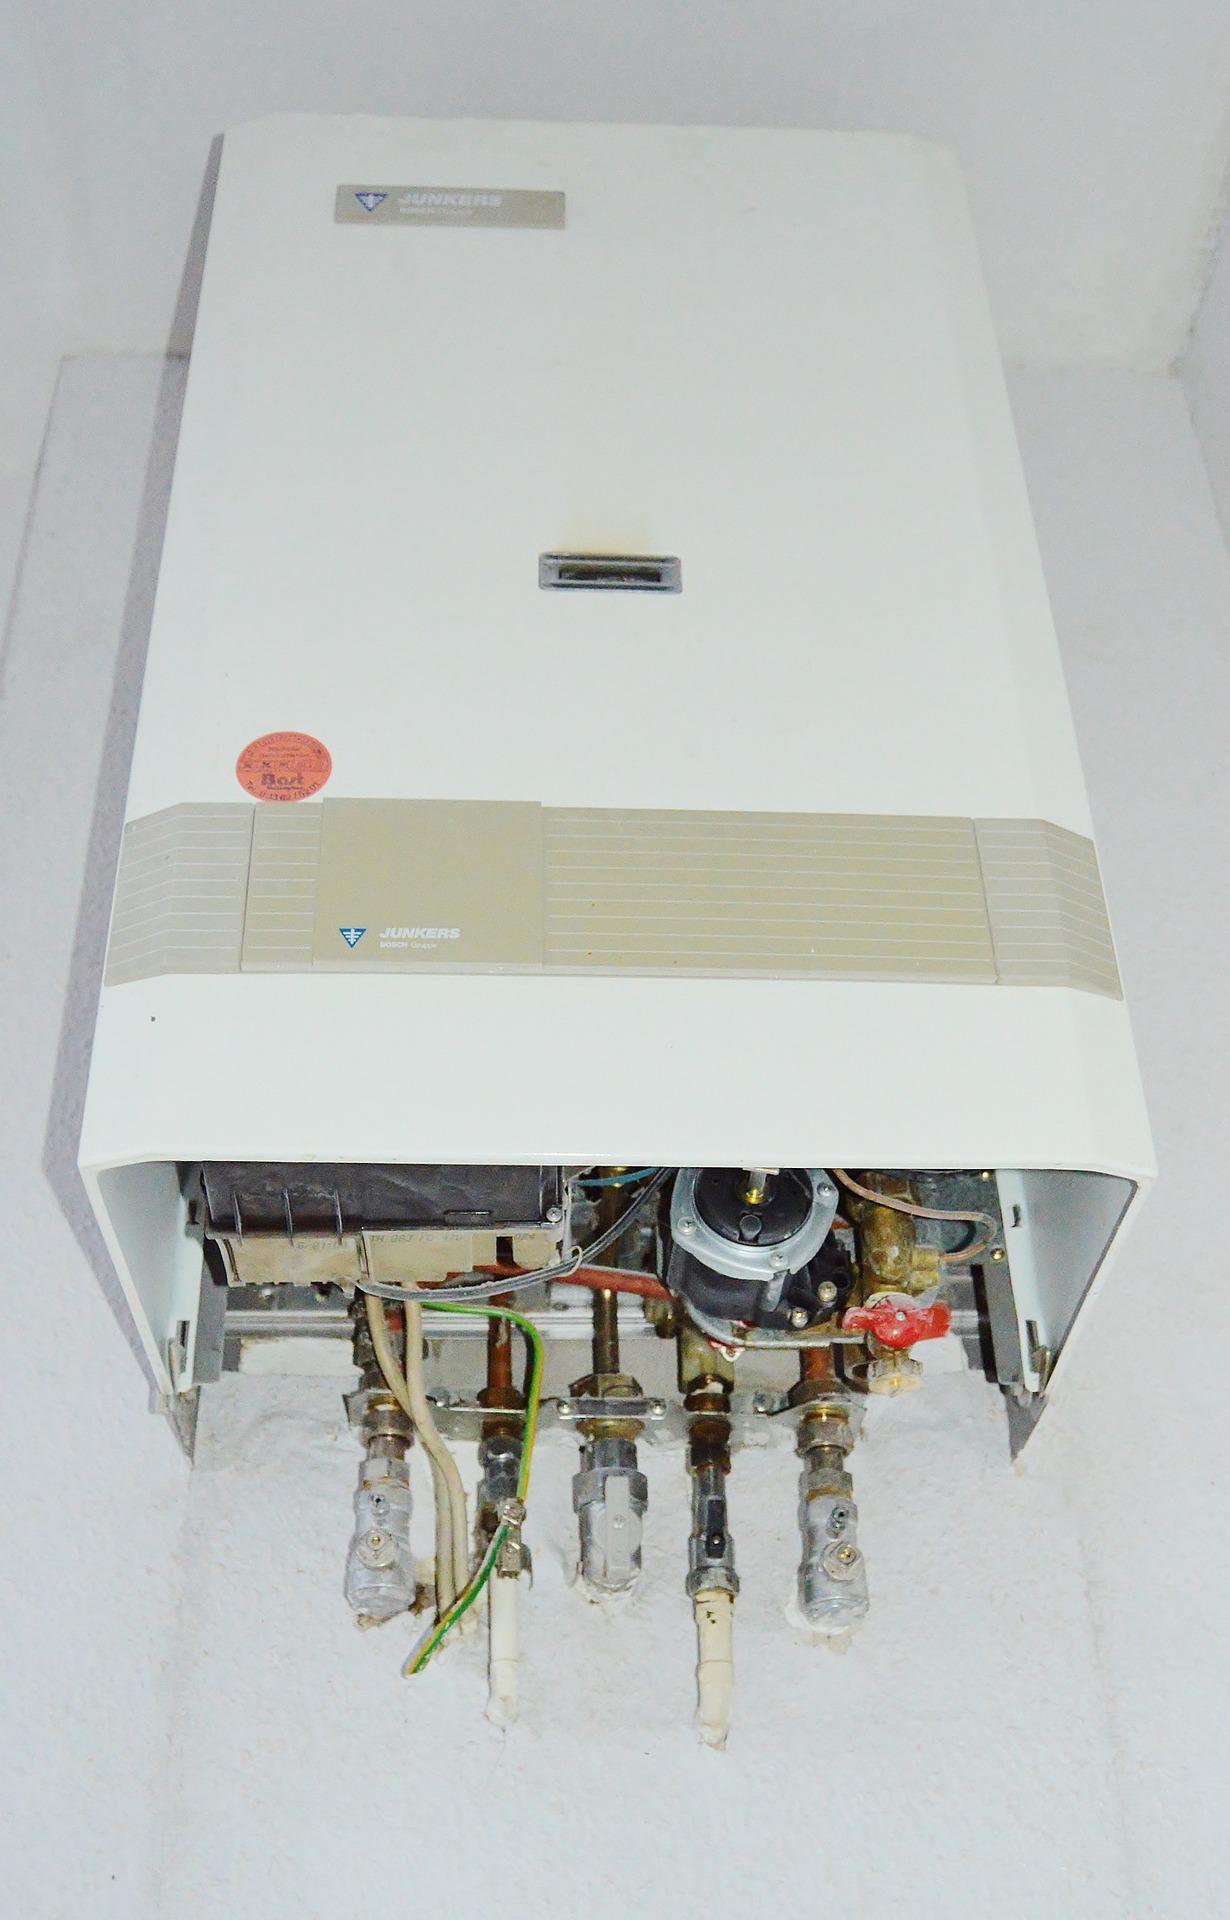 5 Tips to Ensure the Safety of Your Instant Water Heater